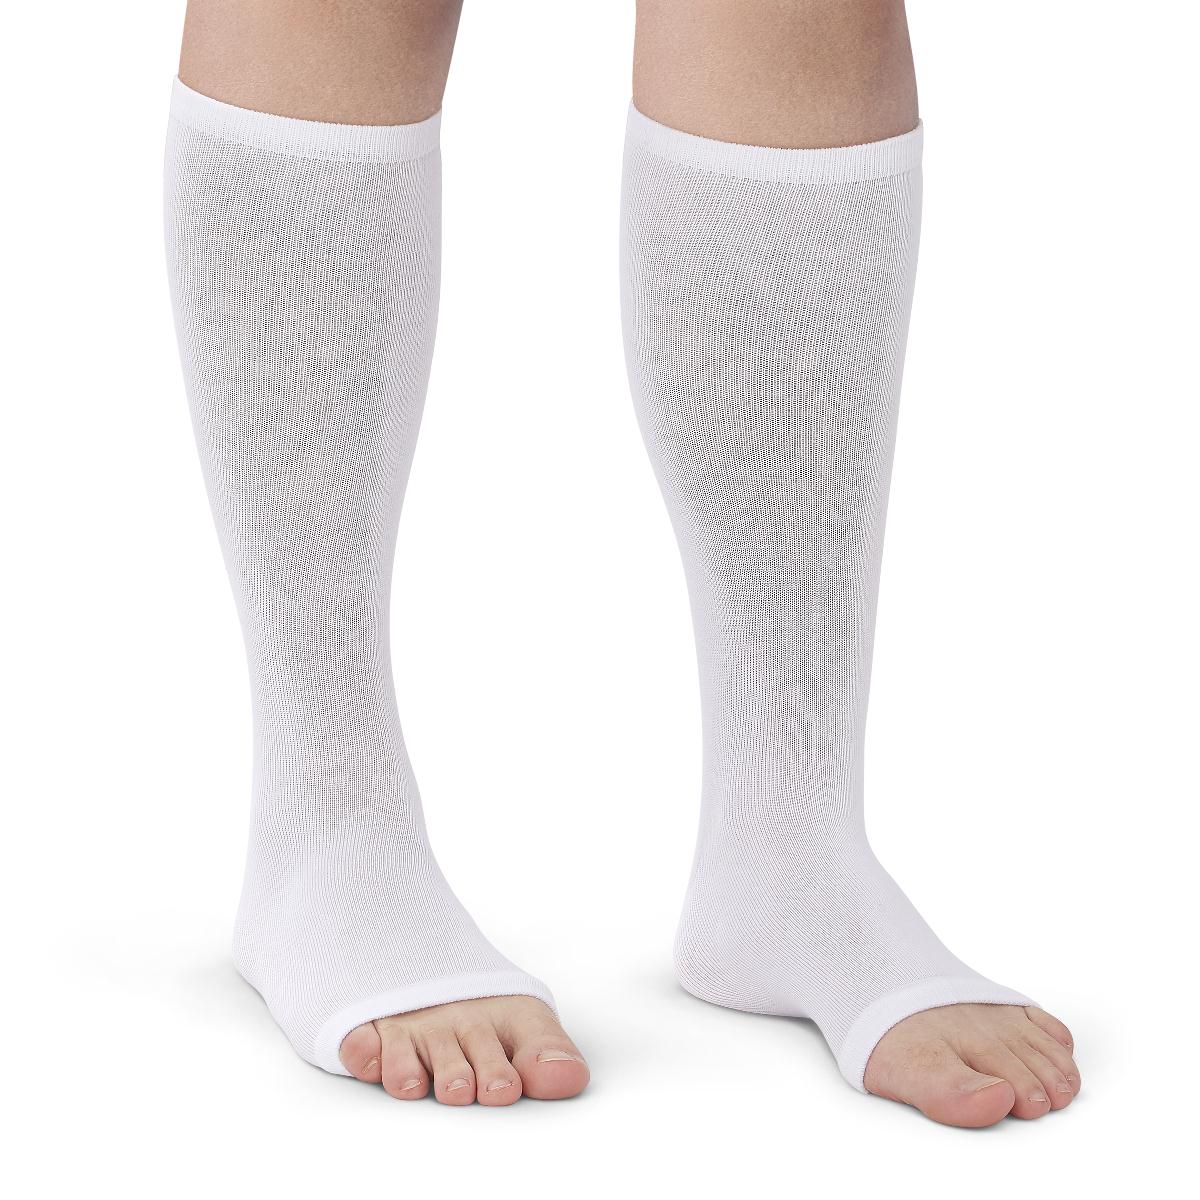 2 Each-Pair / White / 15.00000 IN Wound Care - MEDLINE - Wasatch Medical Supply